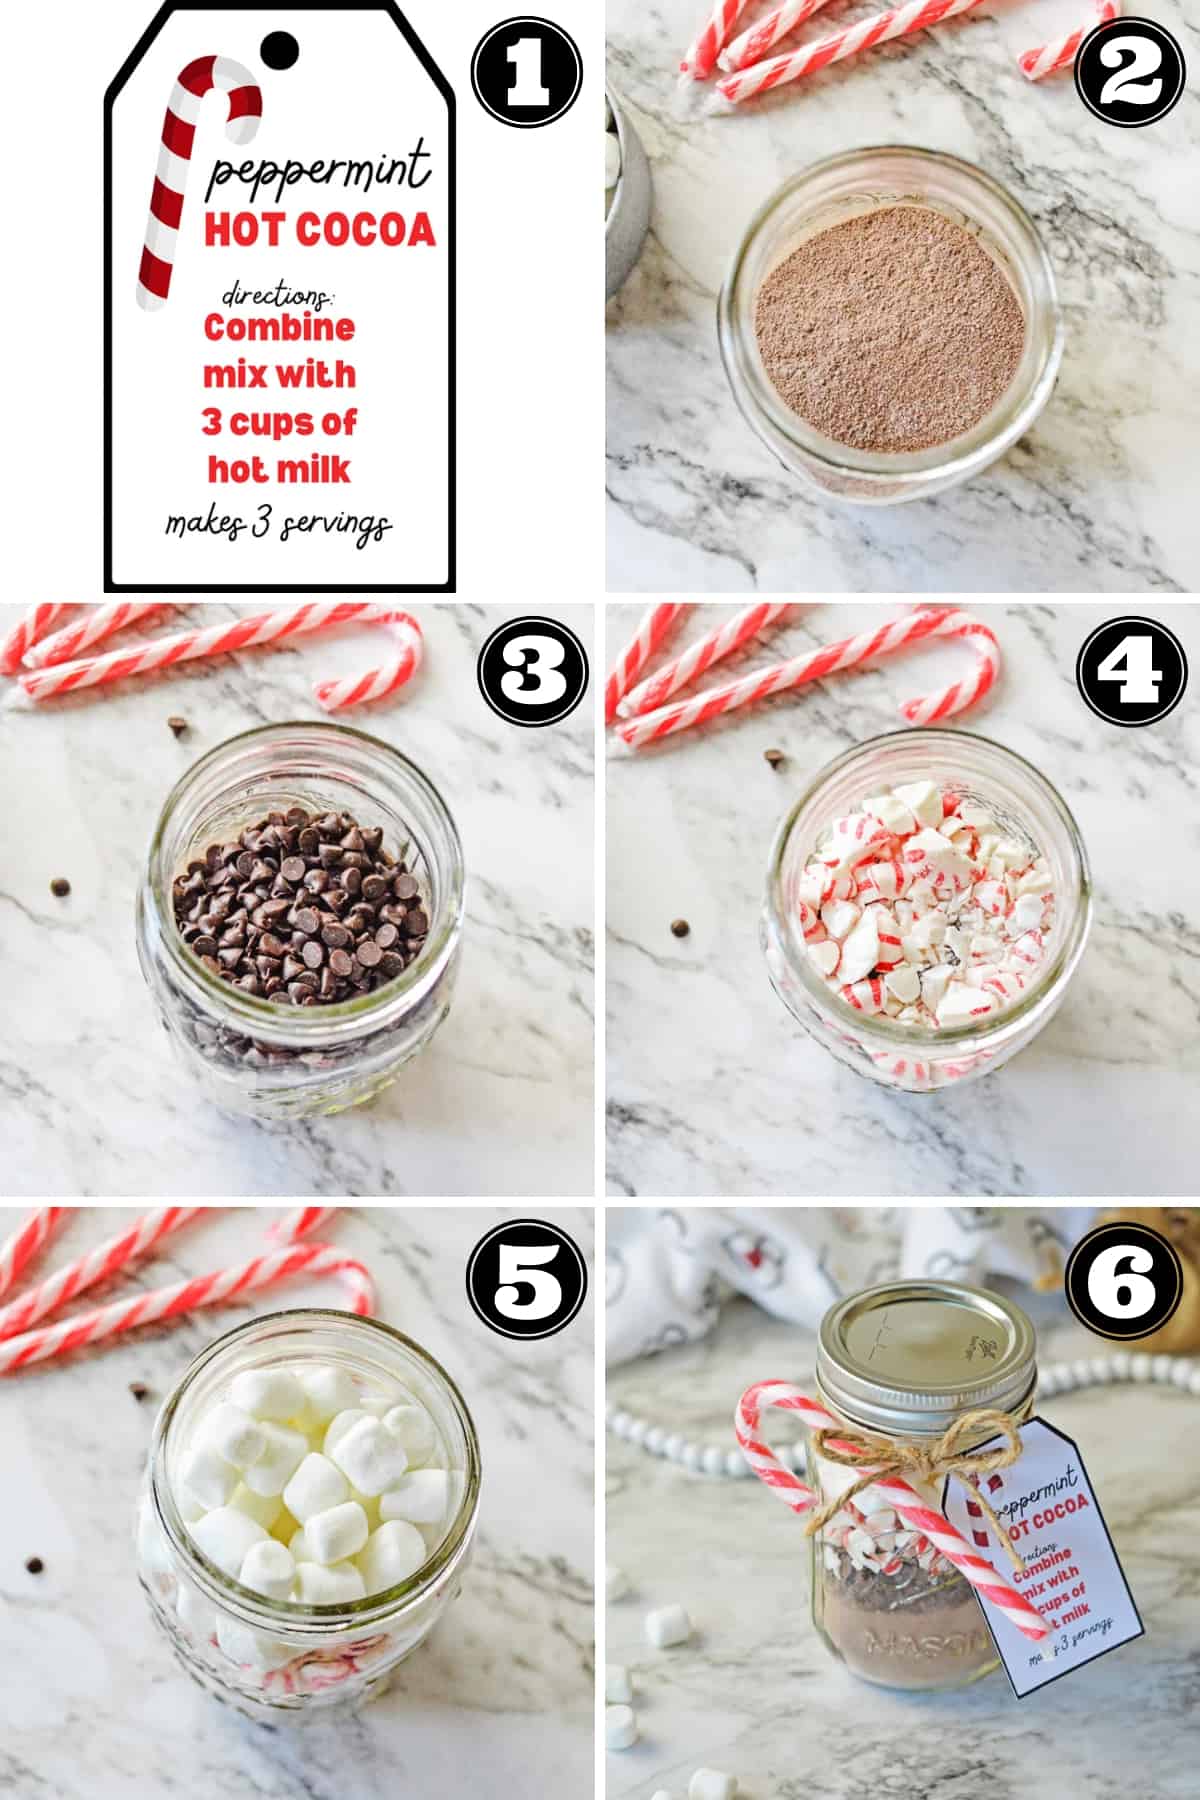 A collage image showing numbered steps to make peppermint hot cocoa in a jar.